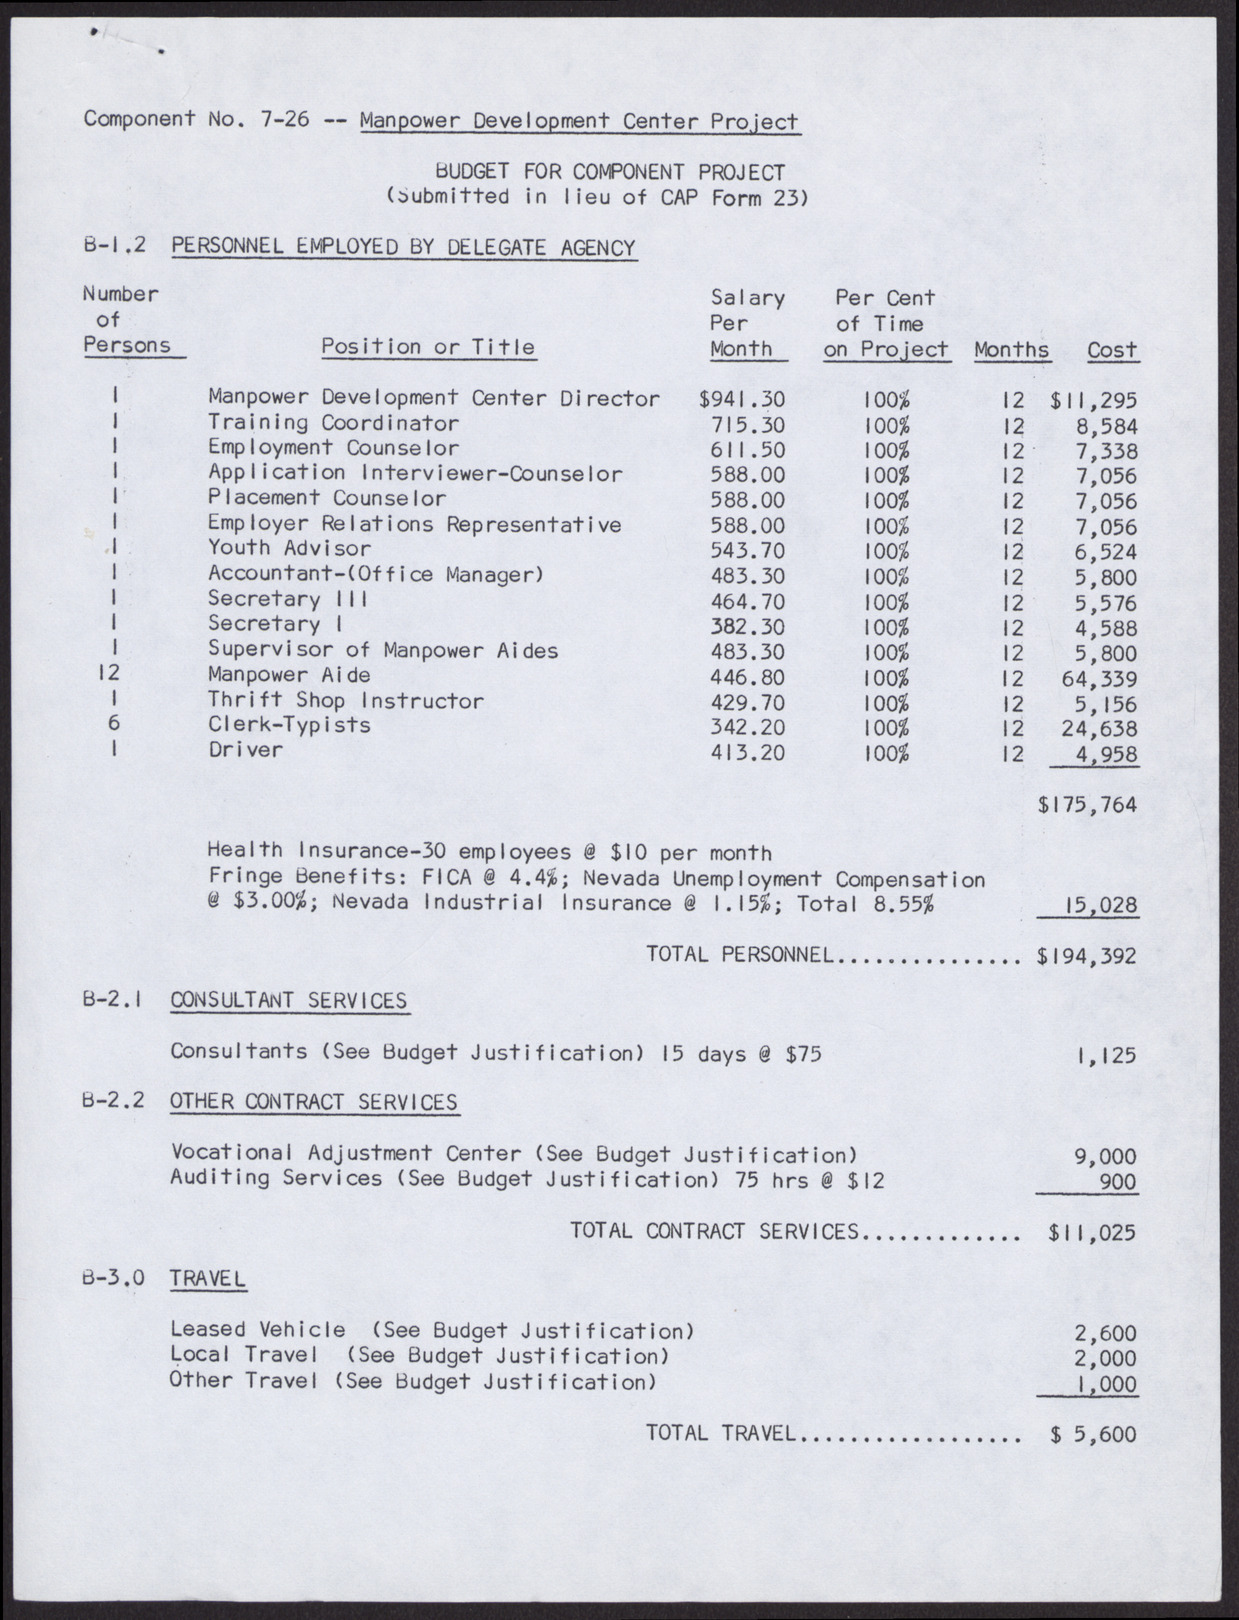 Manpower Development Center Project Budget for Component Project (6 pages), no date